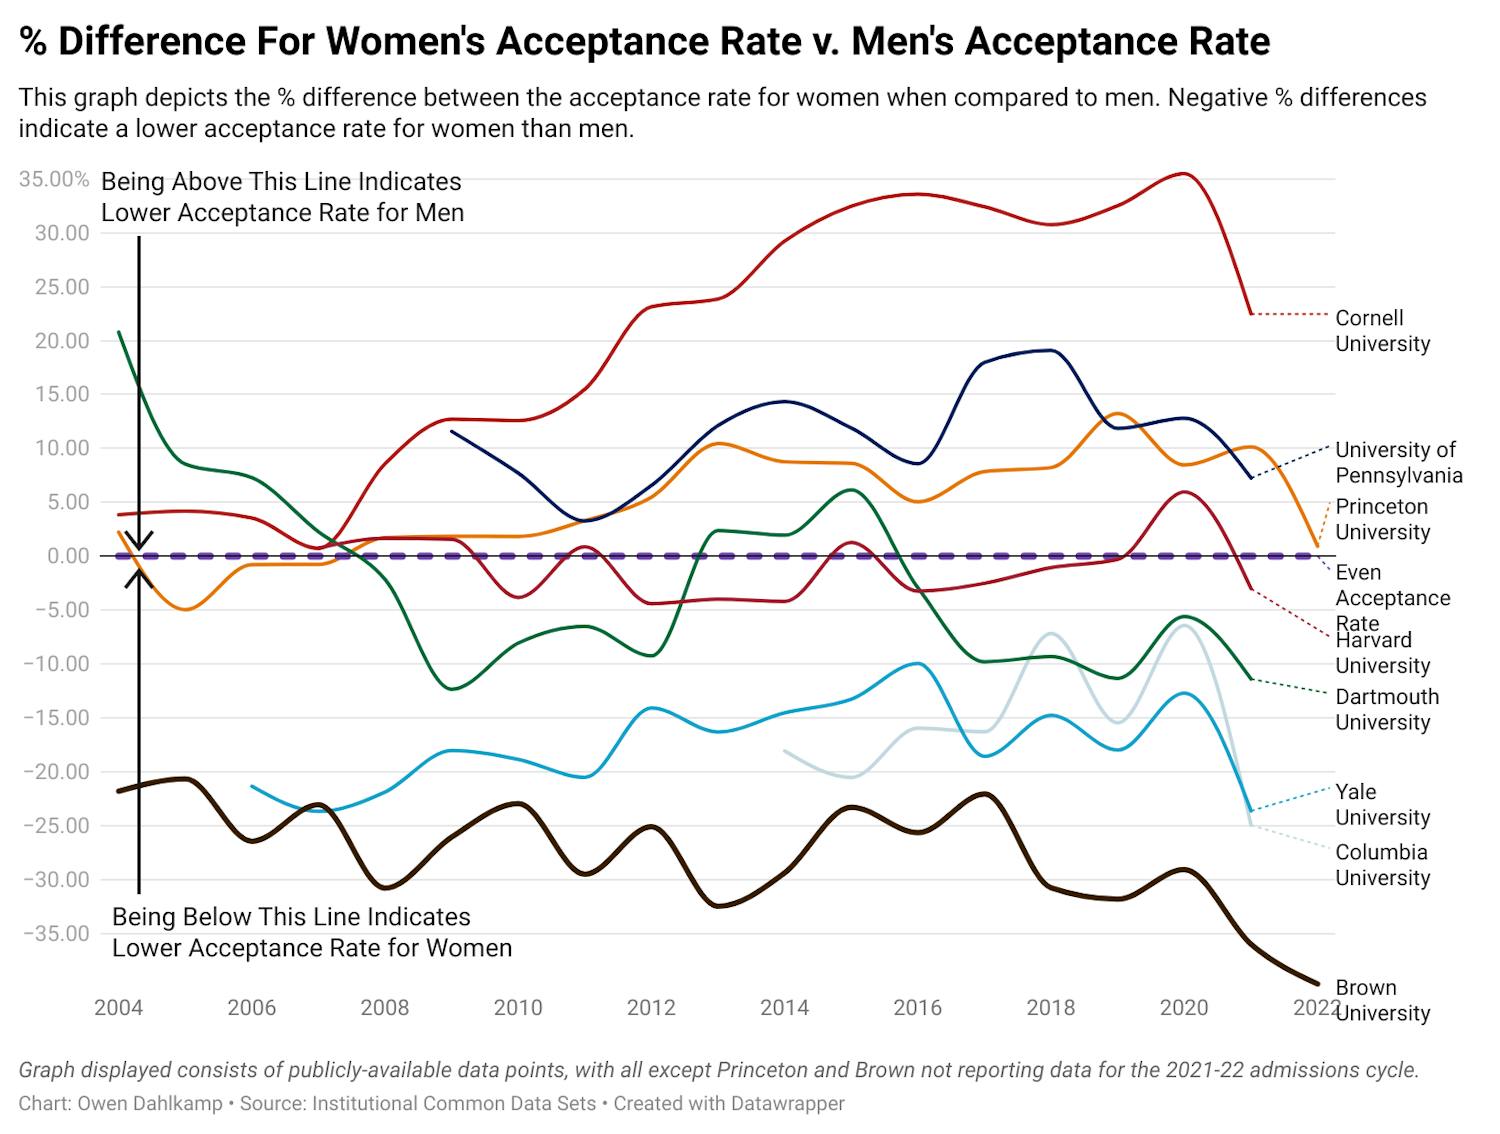 g2ugD--difference-for-women-s-acceptance-rate-v-men-s-acceptance-rate copy.png